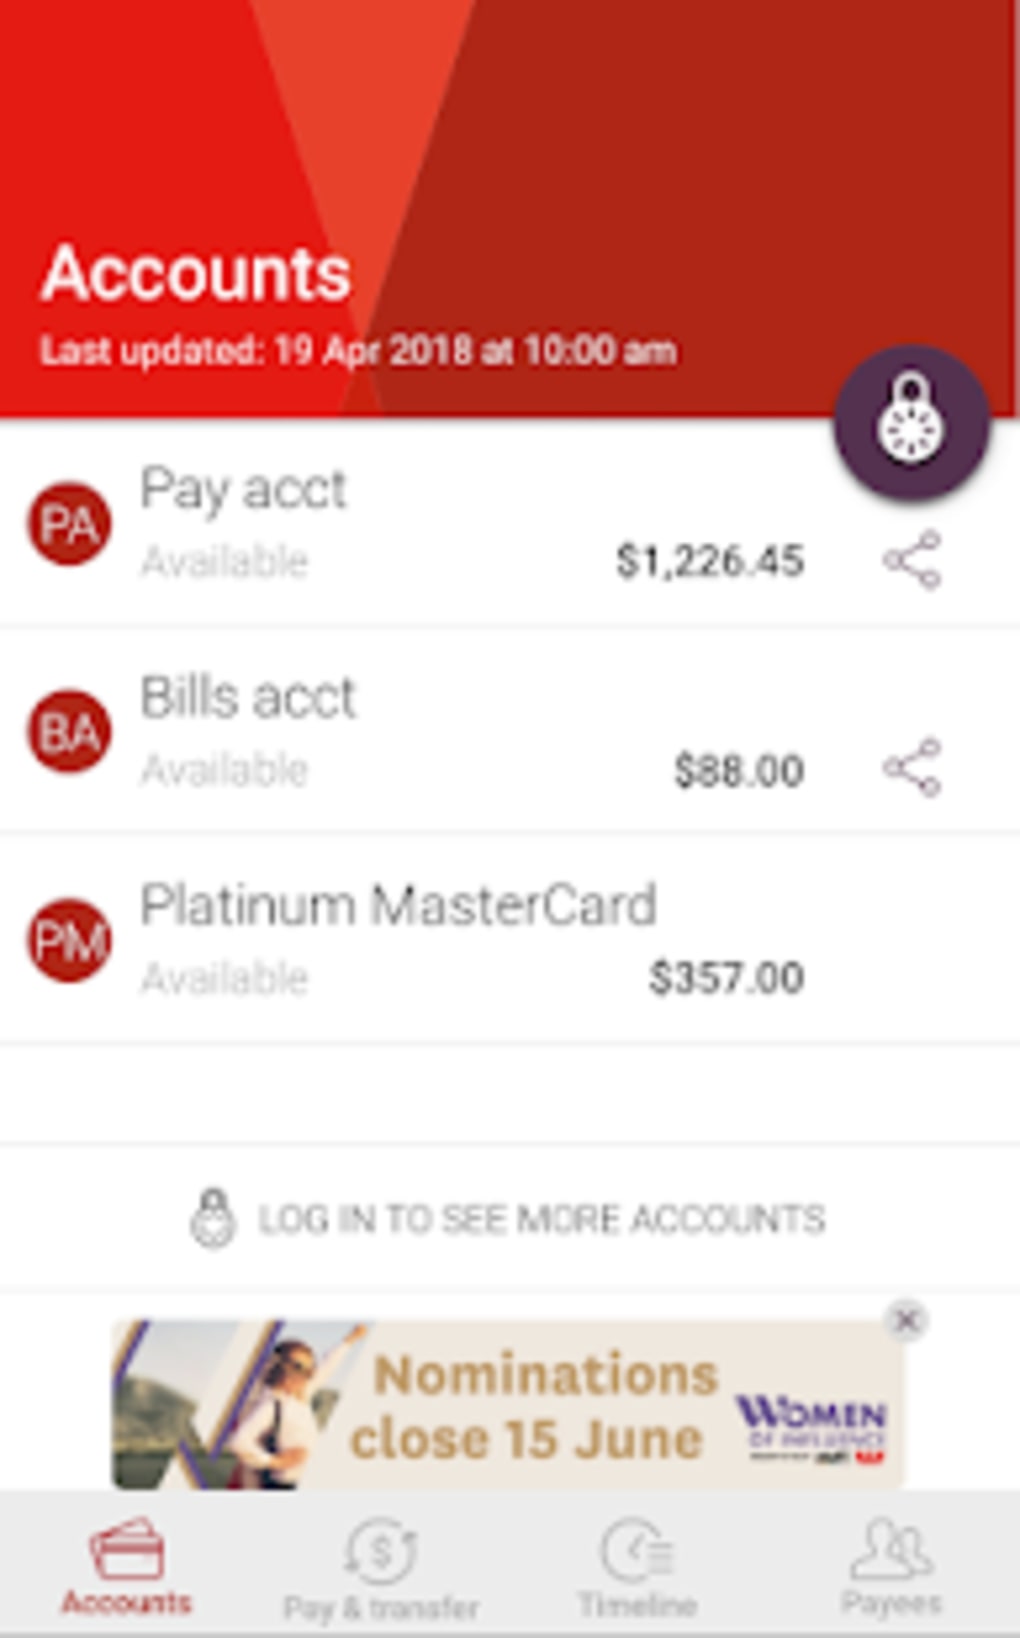 westpac-one-nz-mobile-banking-apk-android